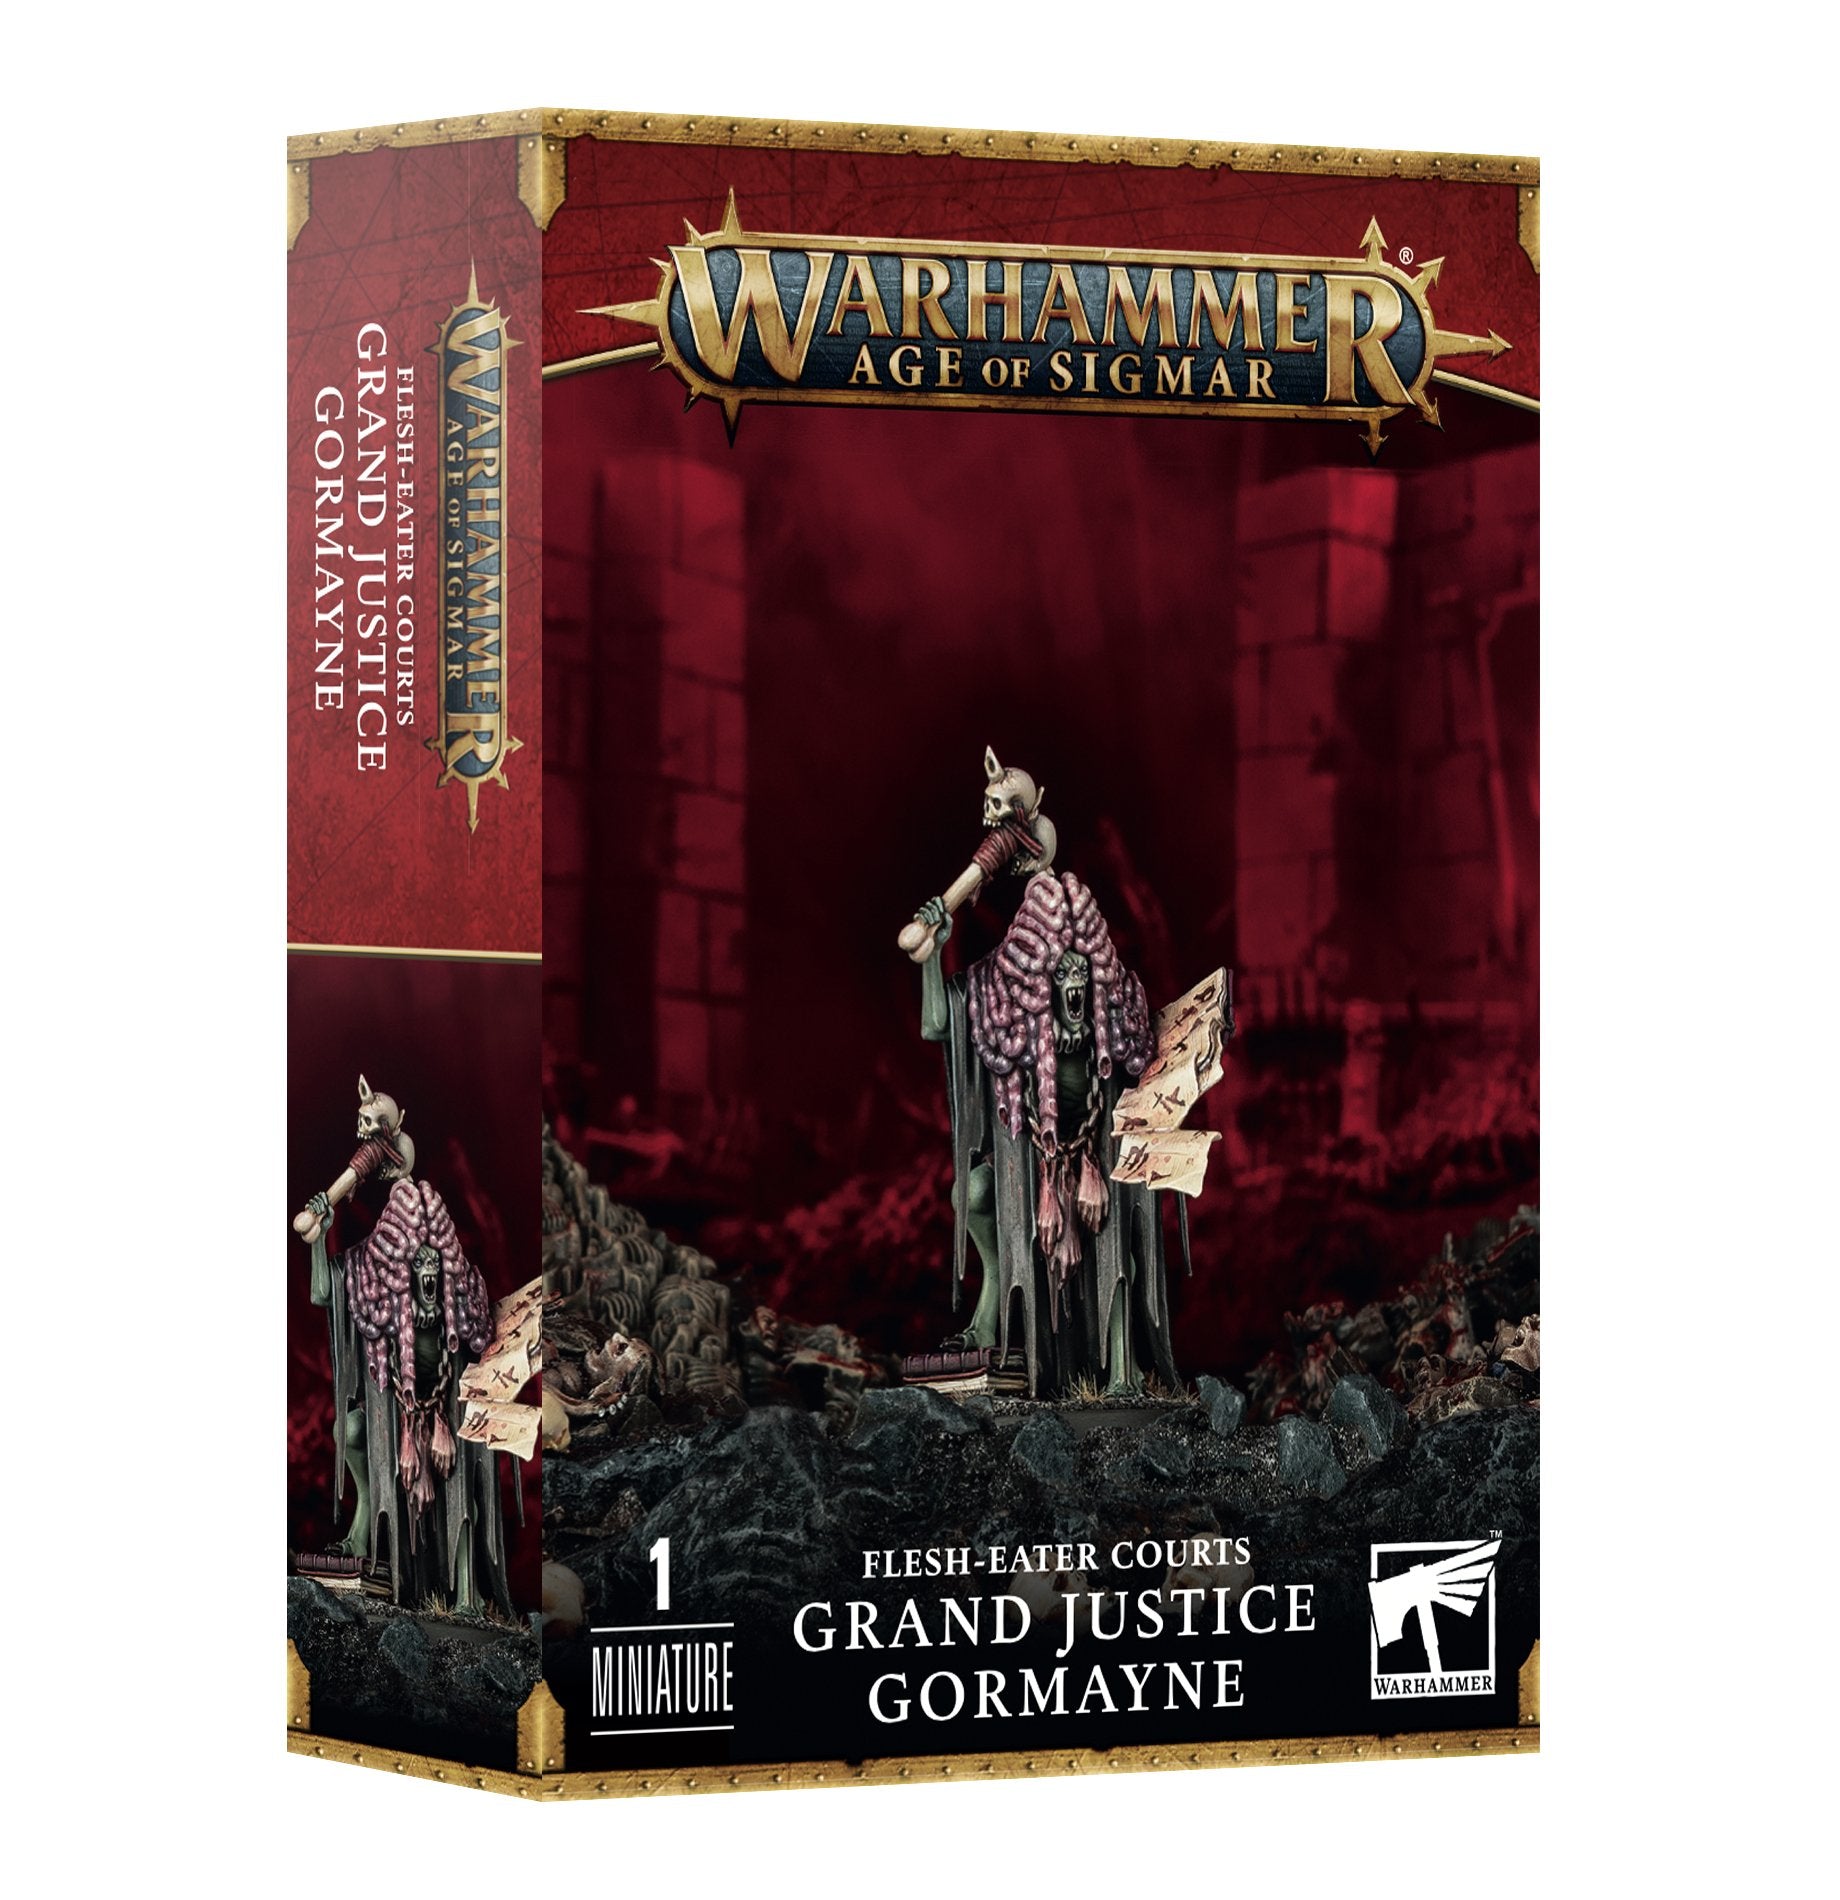 Flesh-Eater Courts: Grand Justice Gormayne - Release Date 17/2/24 - Loaded Dice